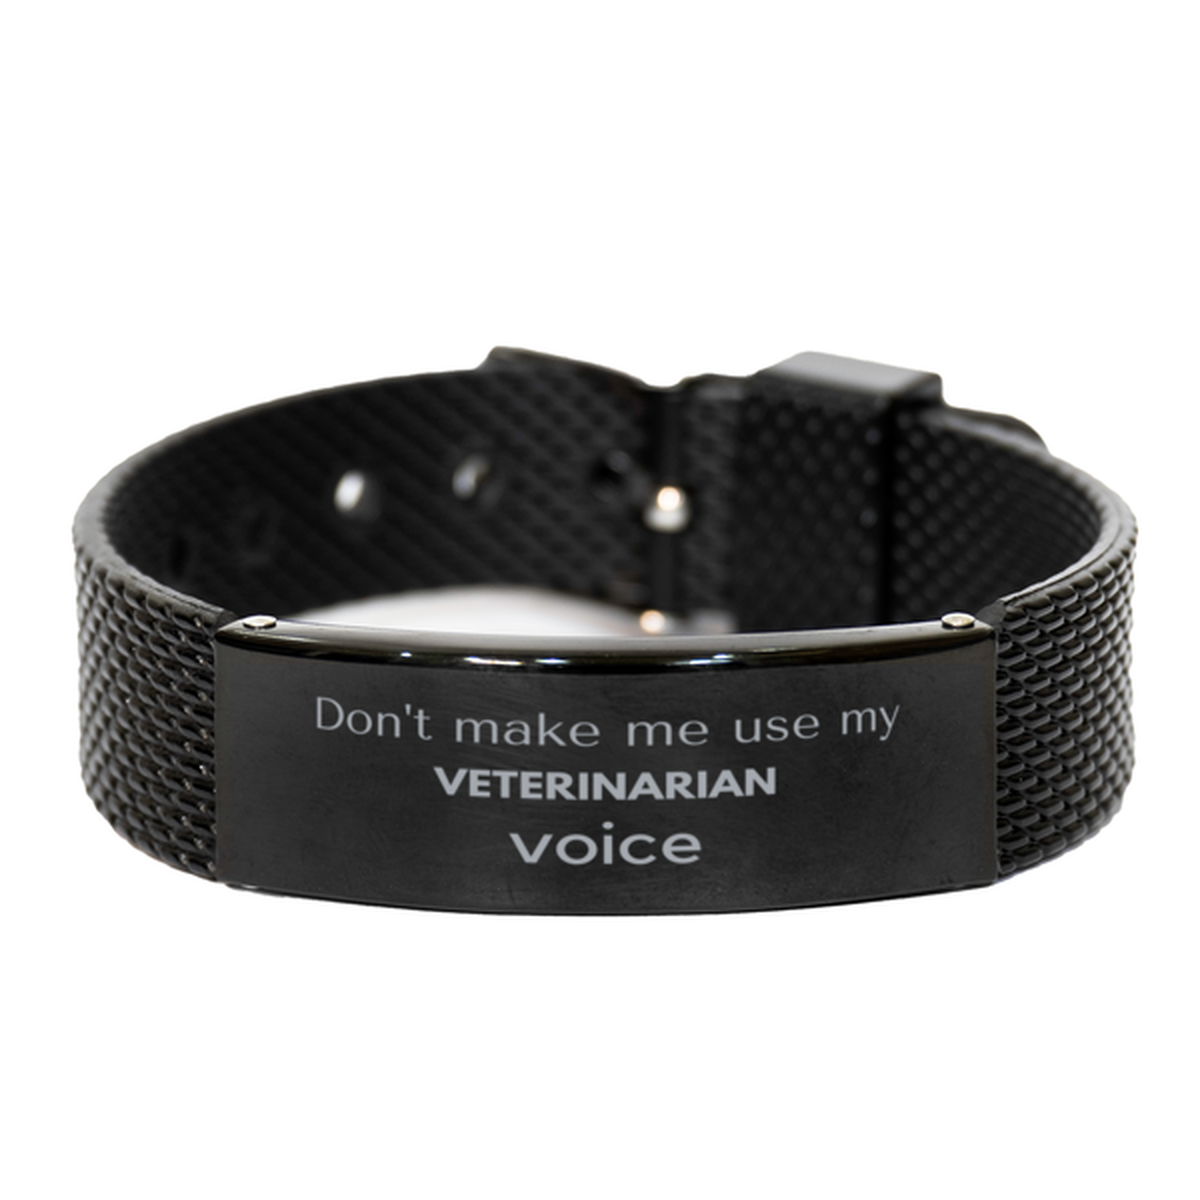 Don't make me use my Veterinarian voice, Sarcasm Veterinarian Gifts, Christmas Veterinarian Black Shark Mesh Bracelet Birthday Unique Gifts For Veterinarian Coworkers, Men, Women, Colleague, Friends